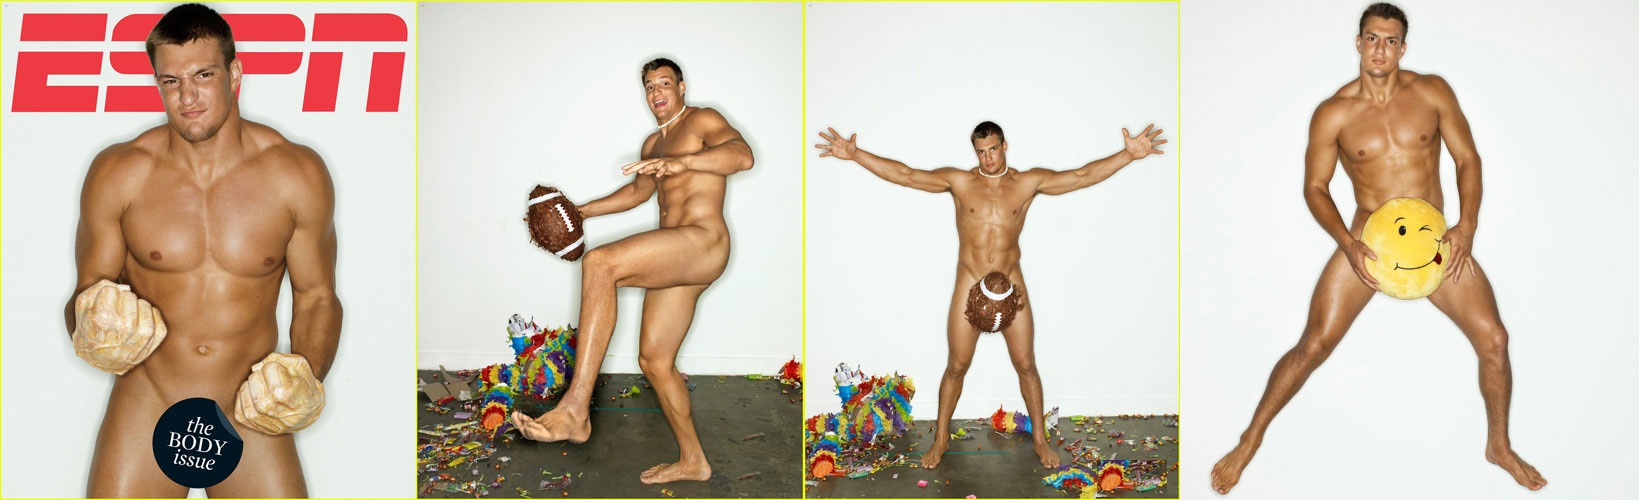 Naked American Football Players 87